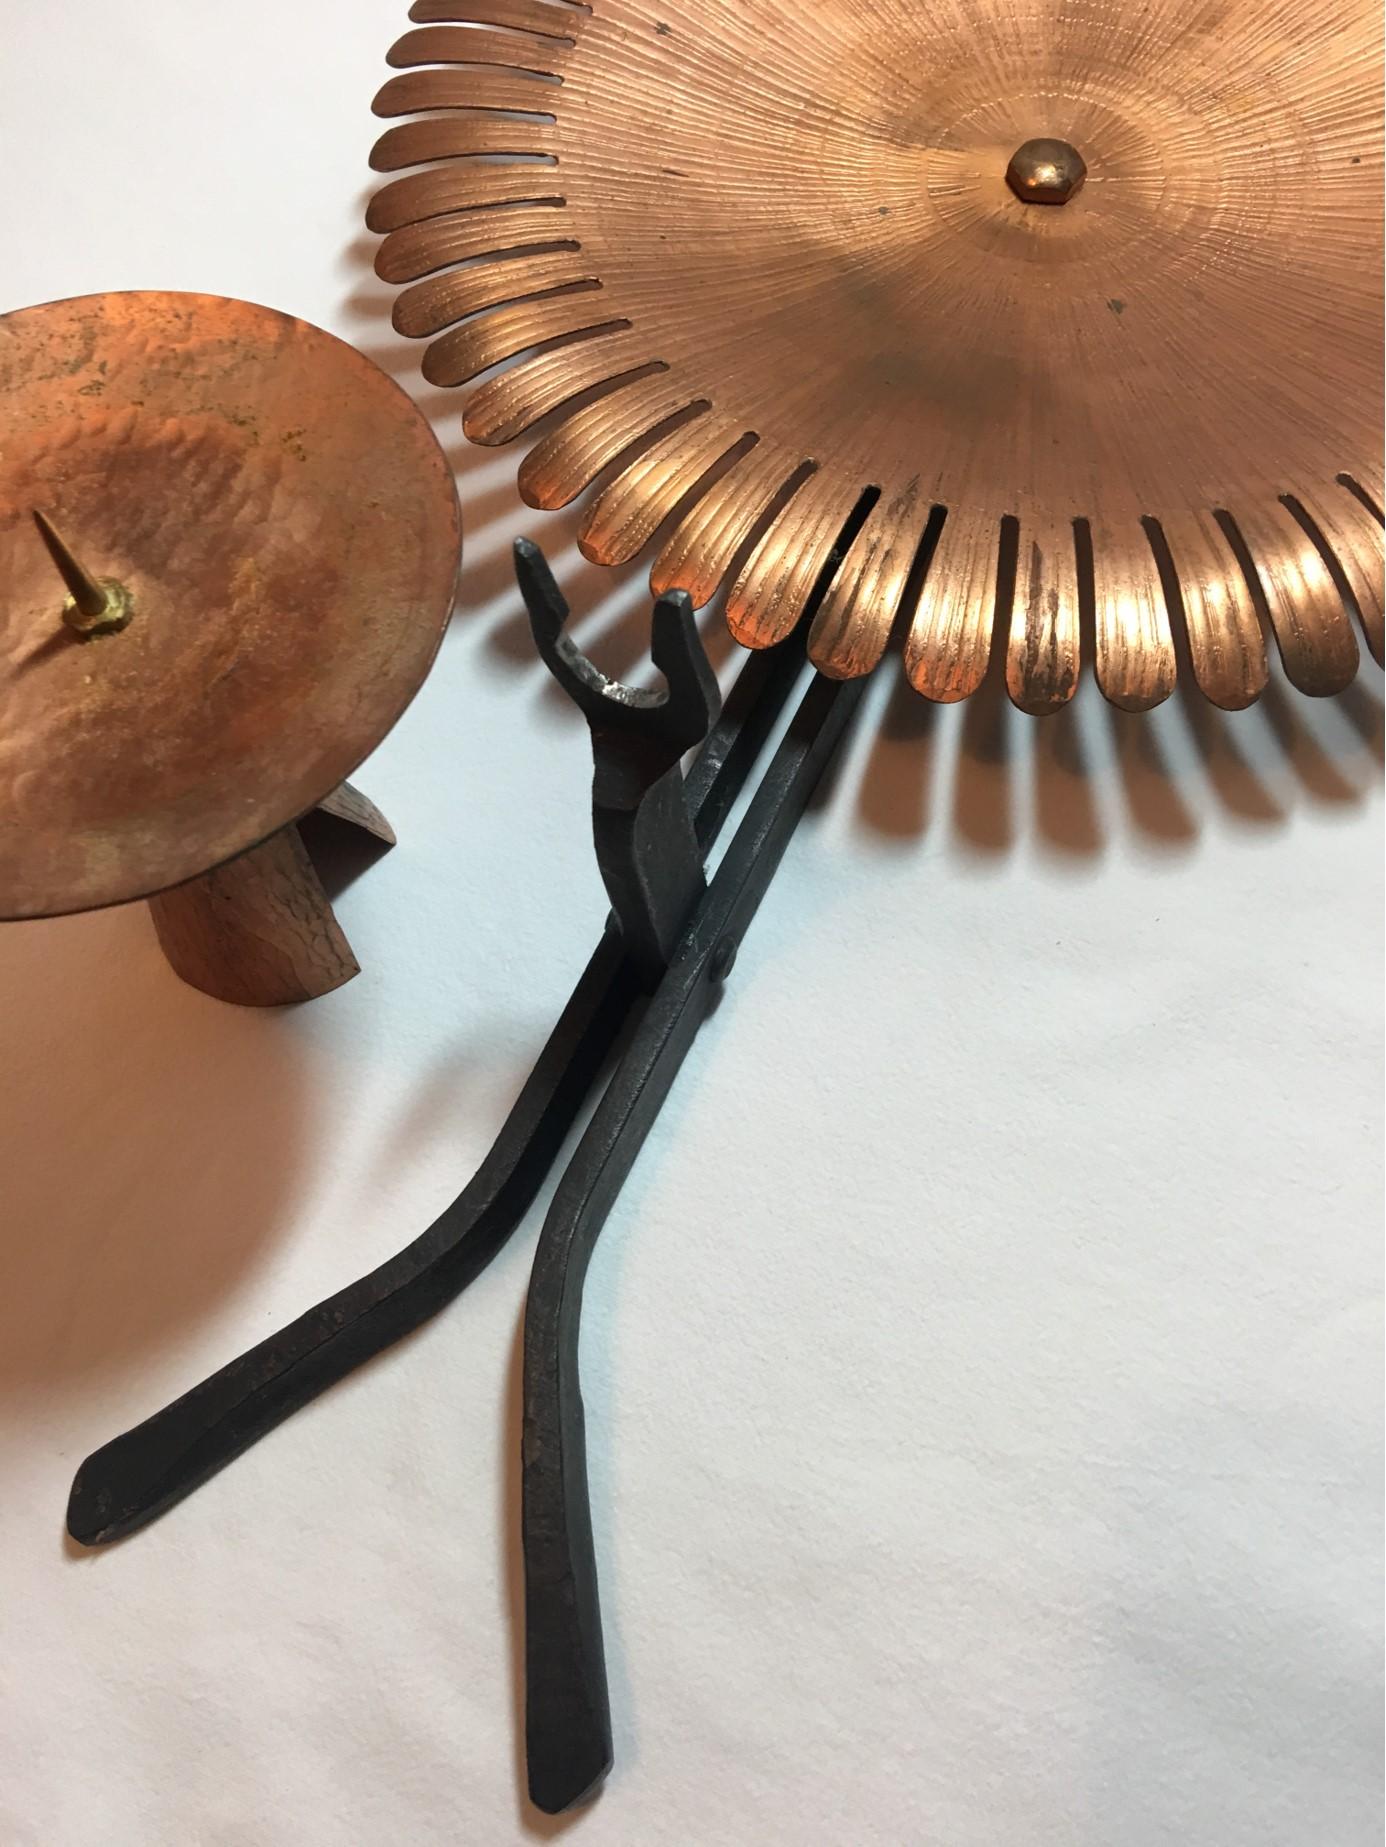 Handmade 1960s Copper and Iron Flower Wall Candleholder In Fair Condition For Sale In Frisco, TX